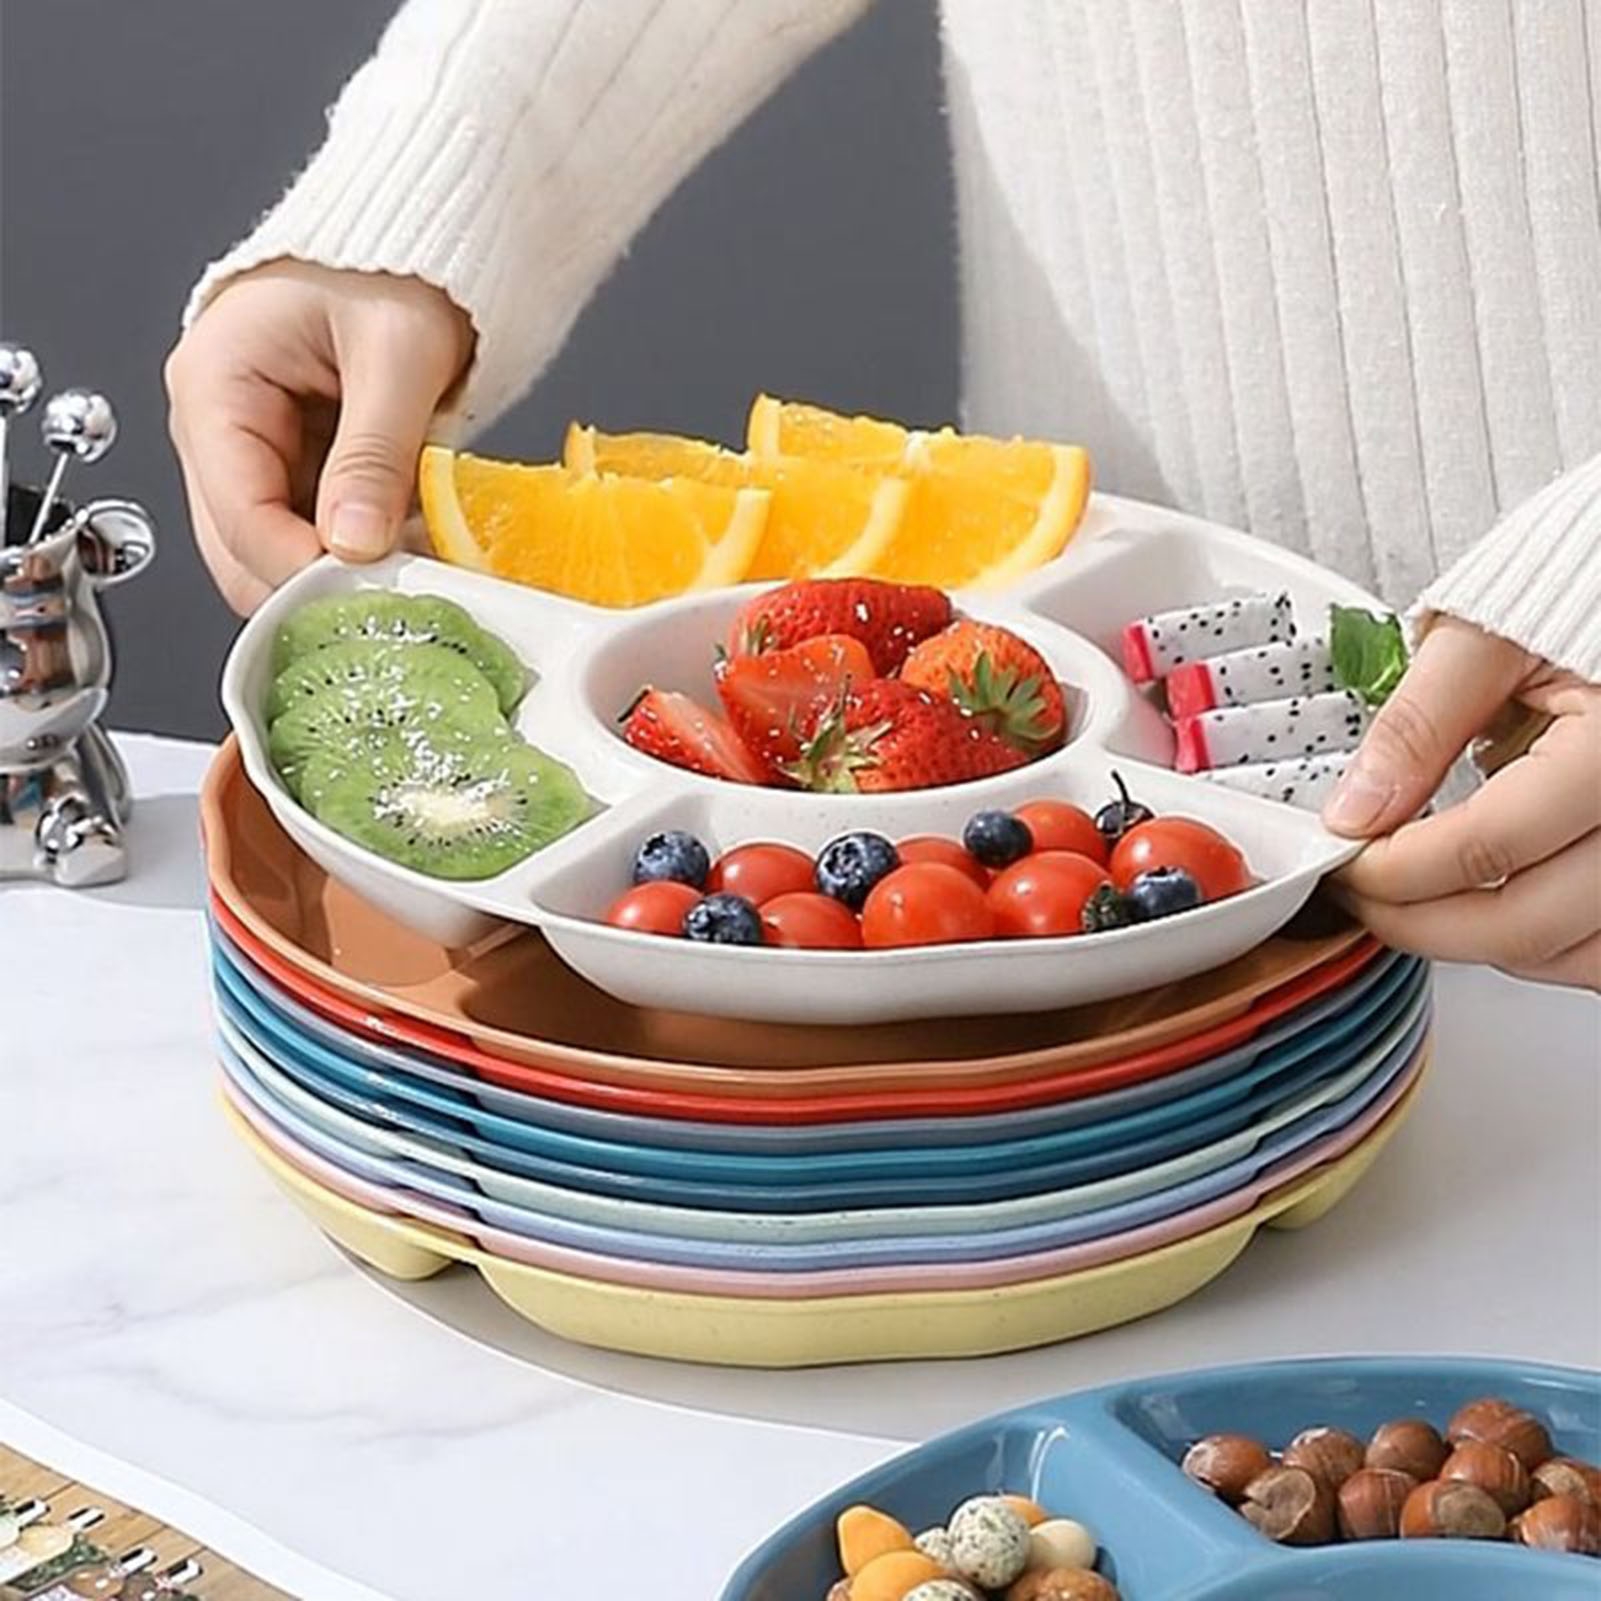 lsiaeian Sectional Platter Divided Serving Dishes Appetizer Serving Trays with 5 Compartments Platter Tray Veggie Tray Chip Dip Tray Divided Snack Trays for Fruit Nut Candy Party - image 4 of 8